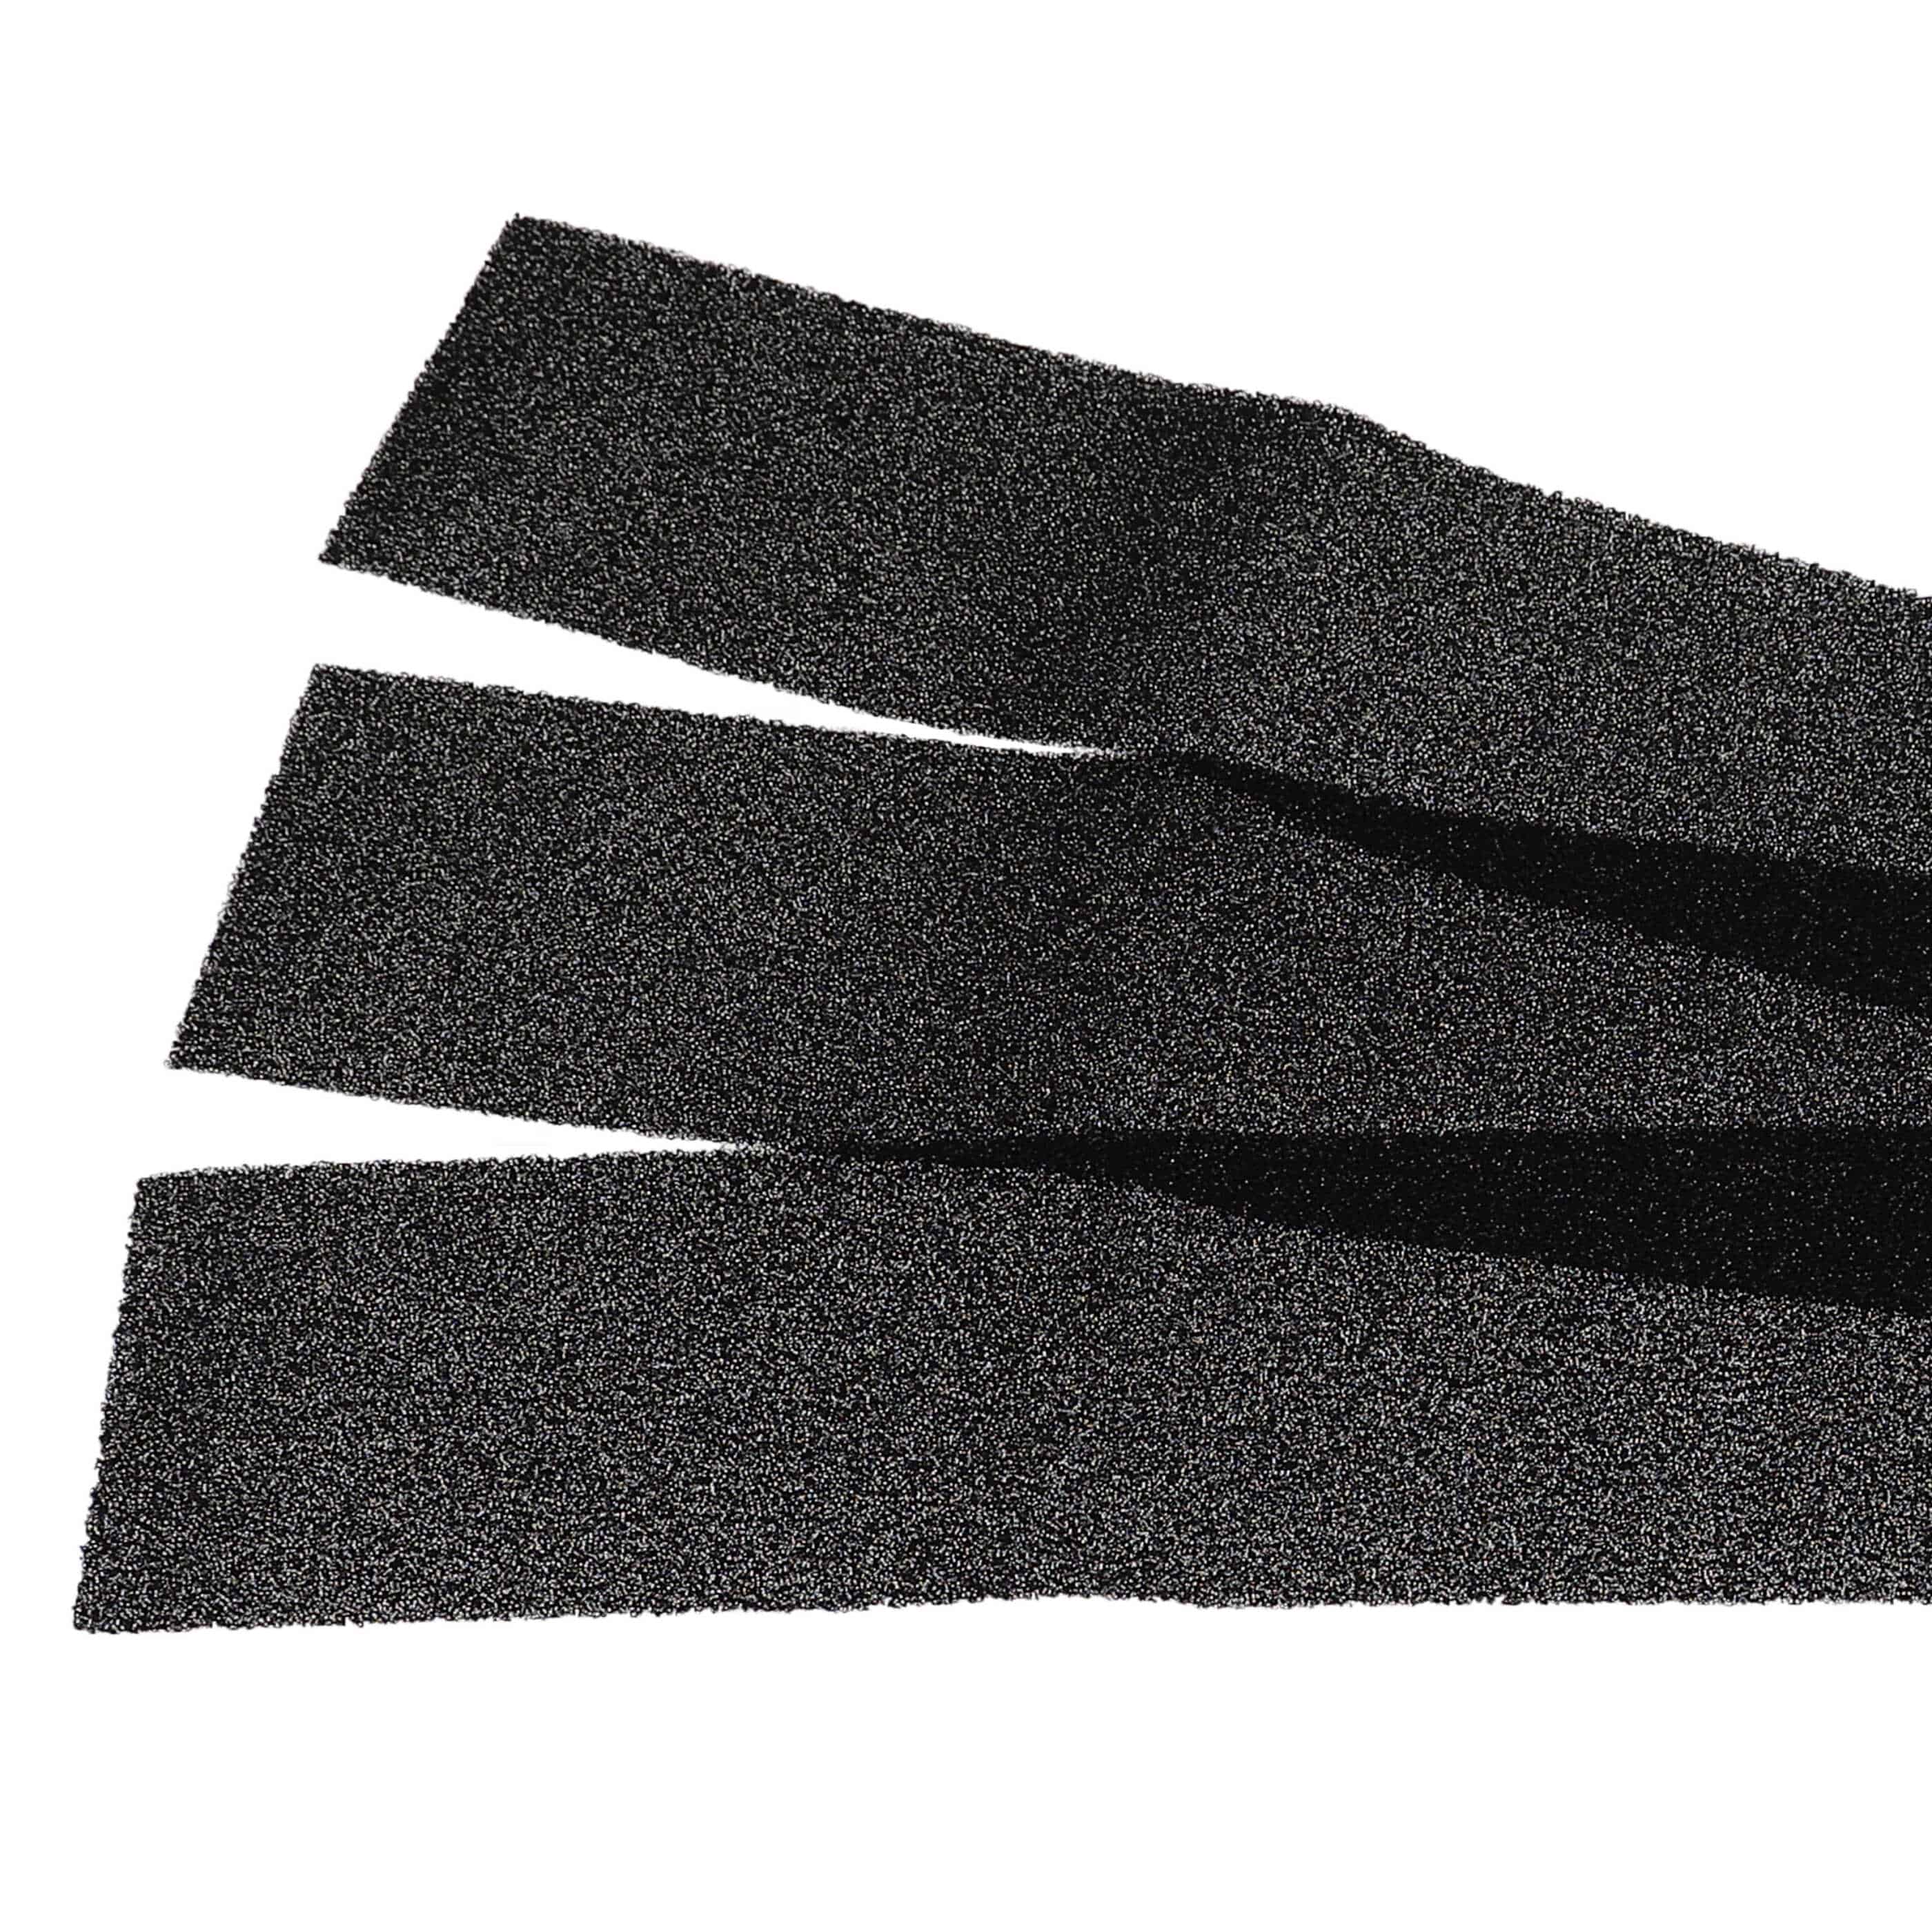 3x Activated Carbon Filter replaces Leitz 2415103 for Leitz Air Purifier - Air Filter Black